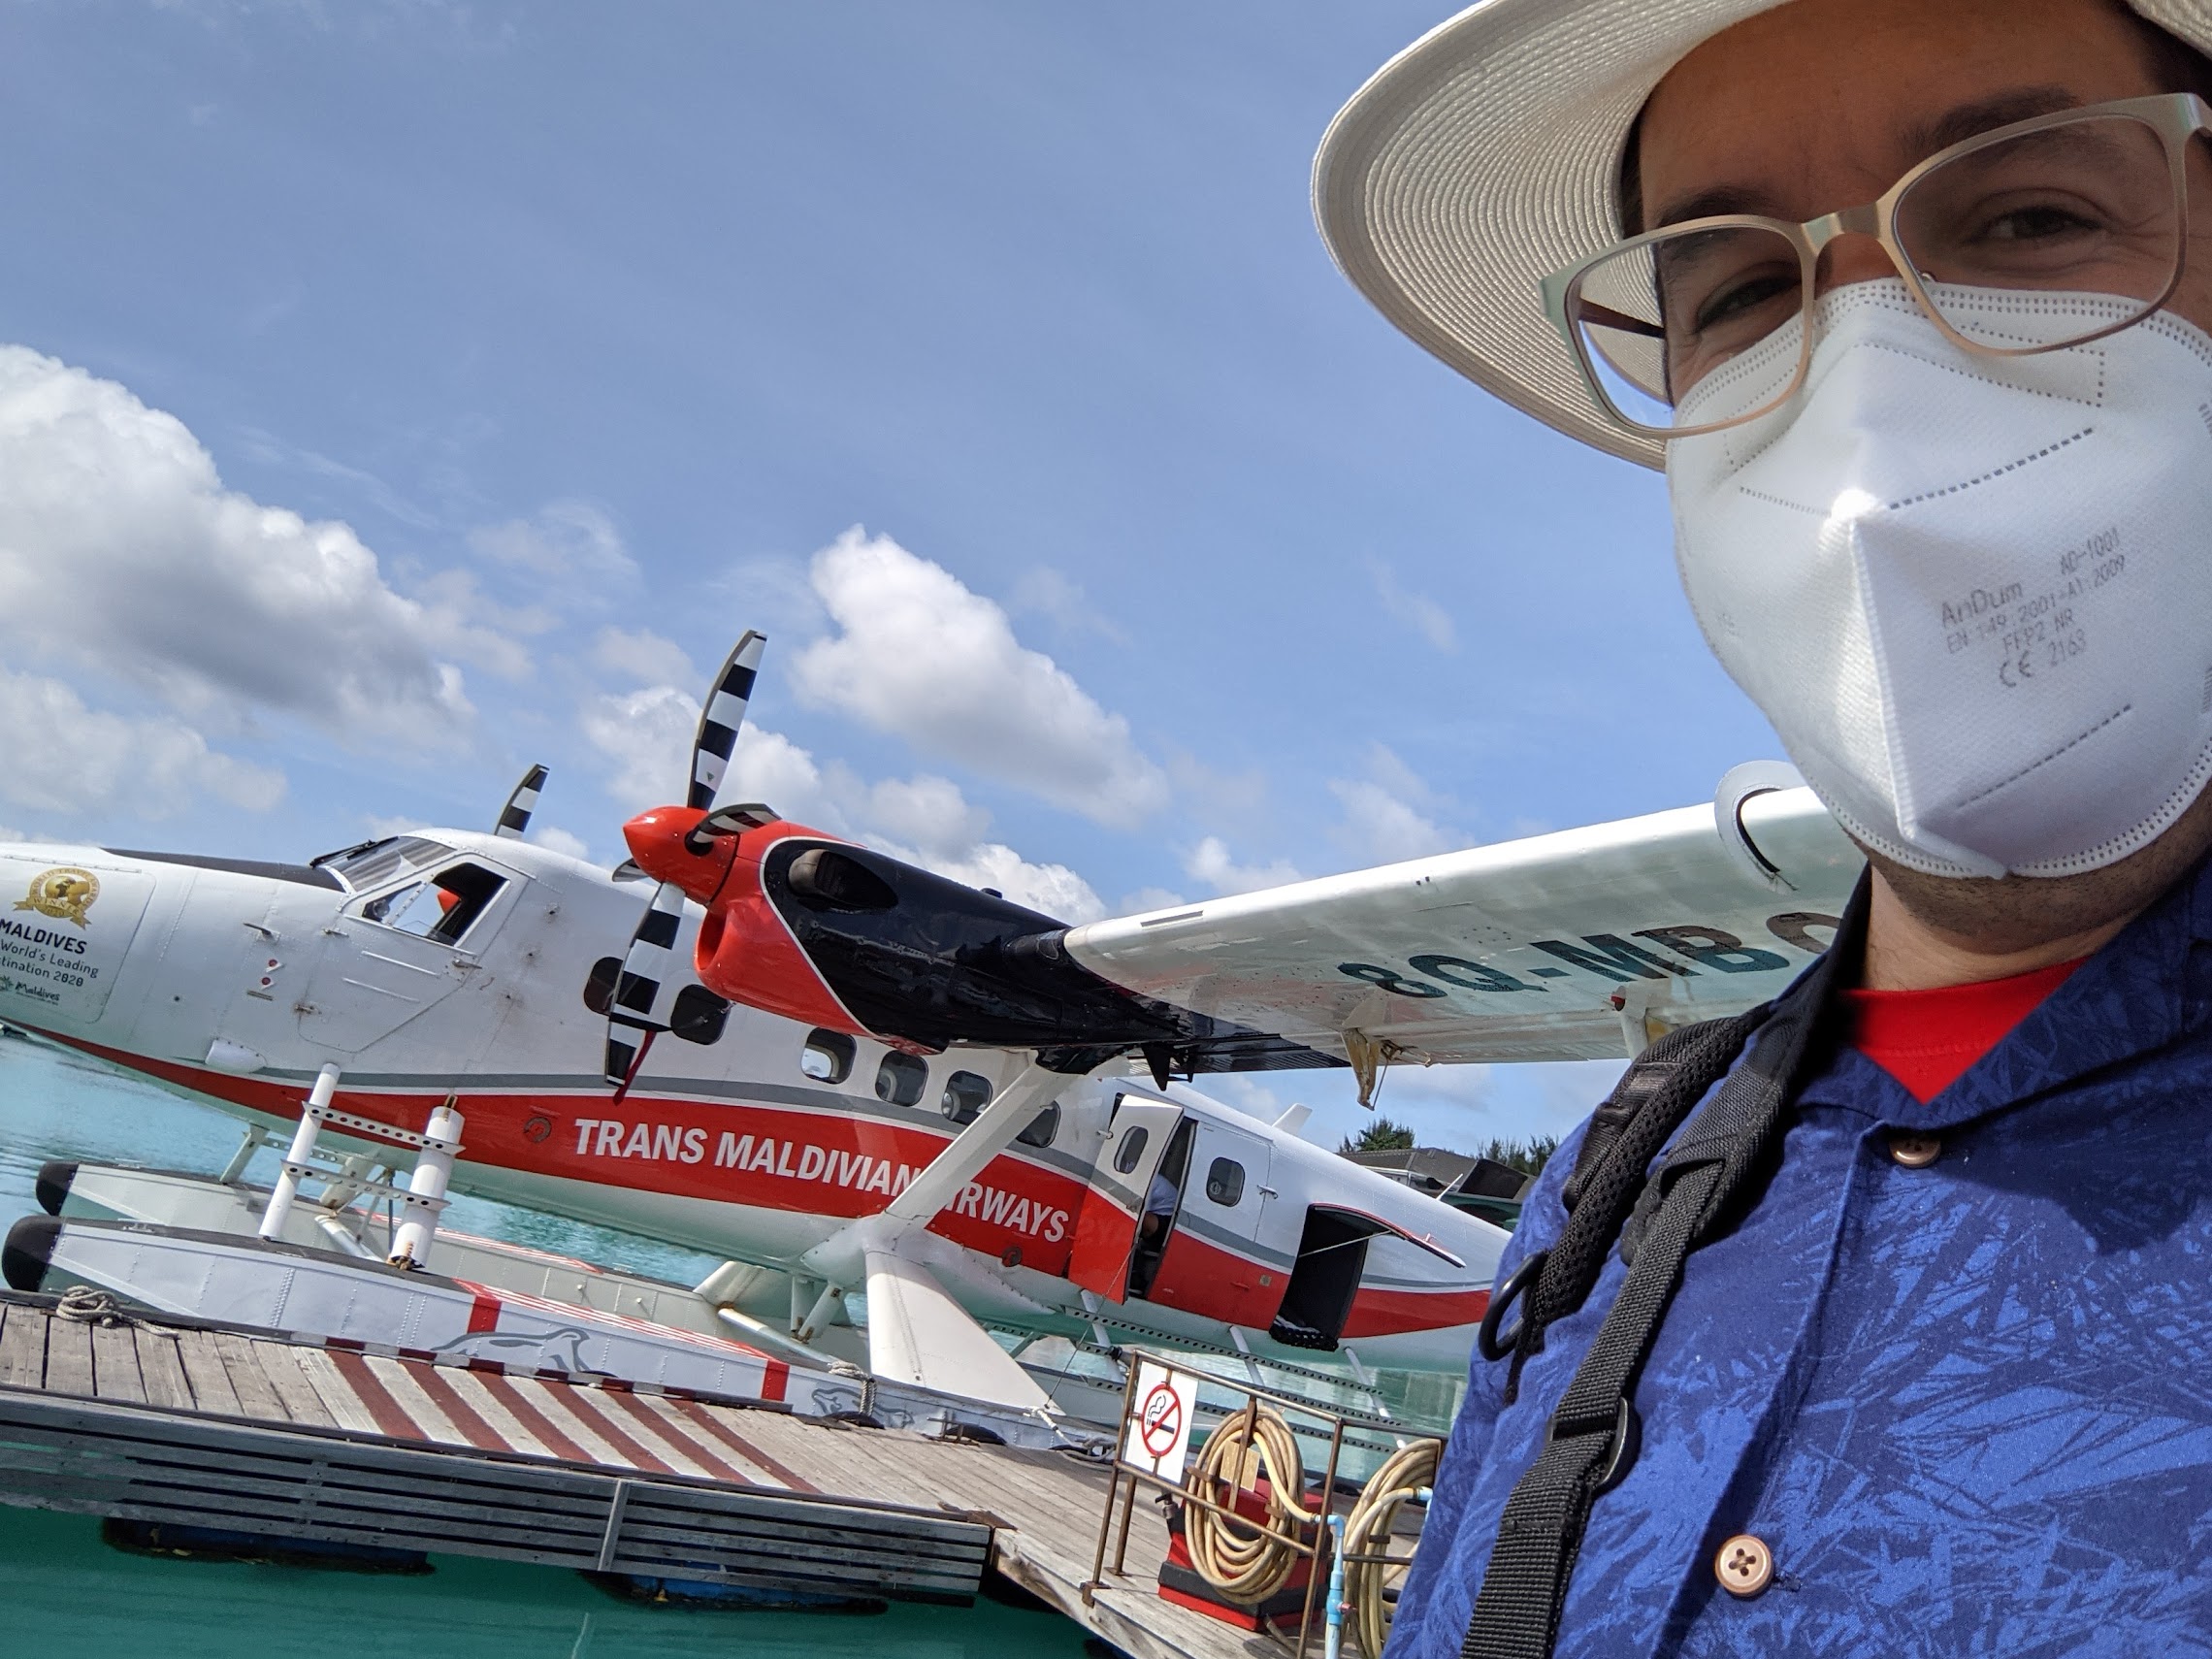 a person wearing a face mask and glasses standing next to an airplane